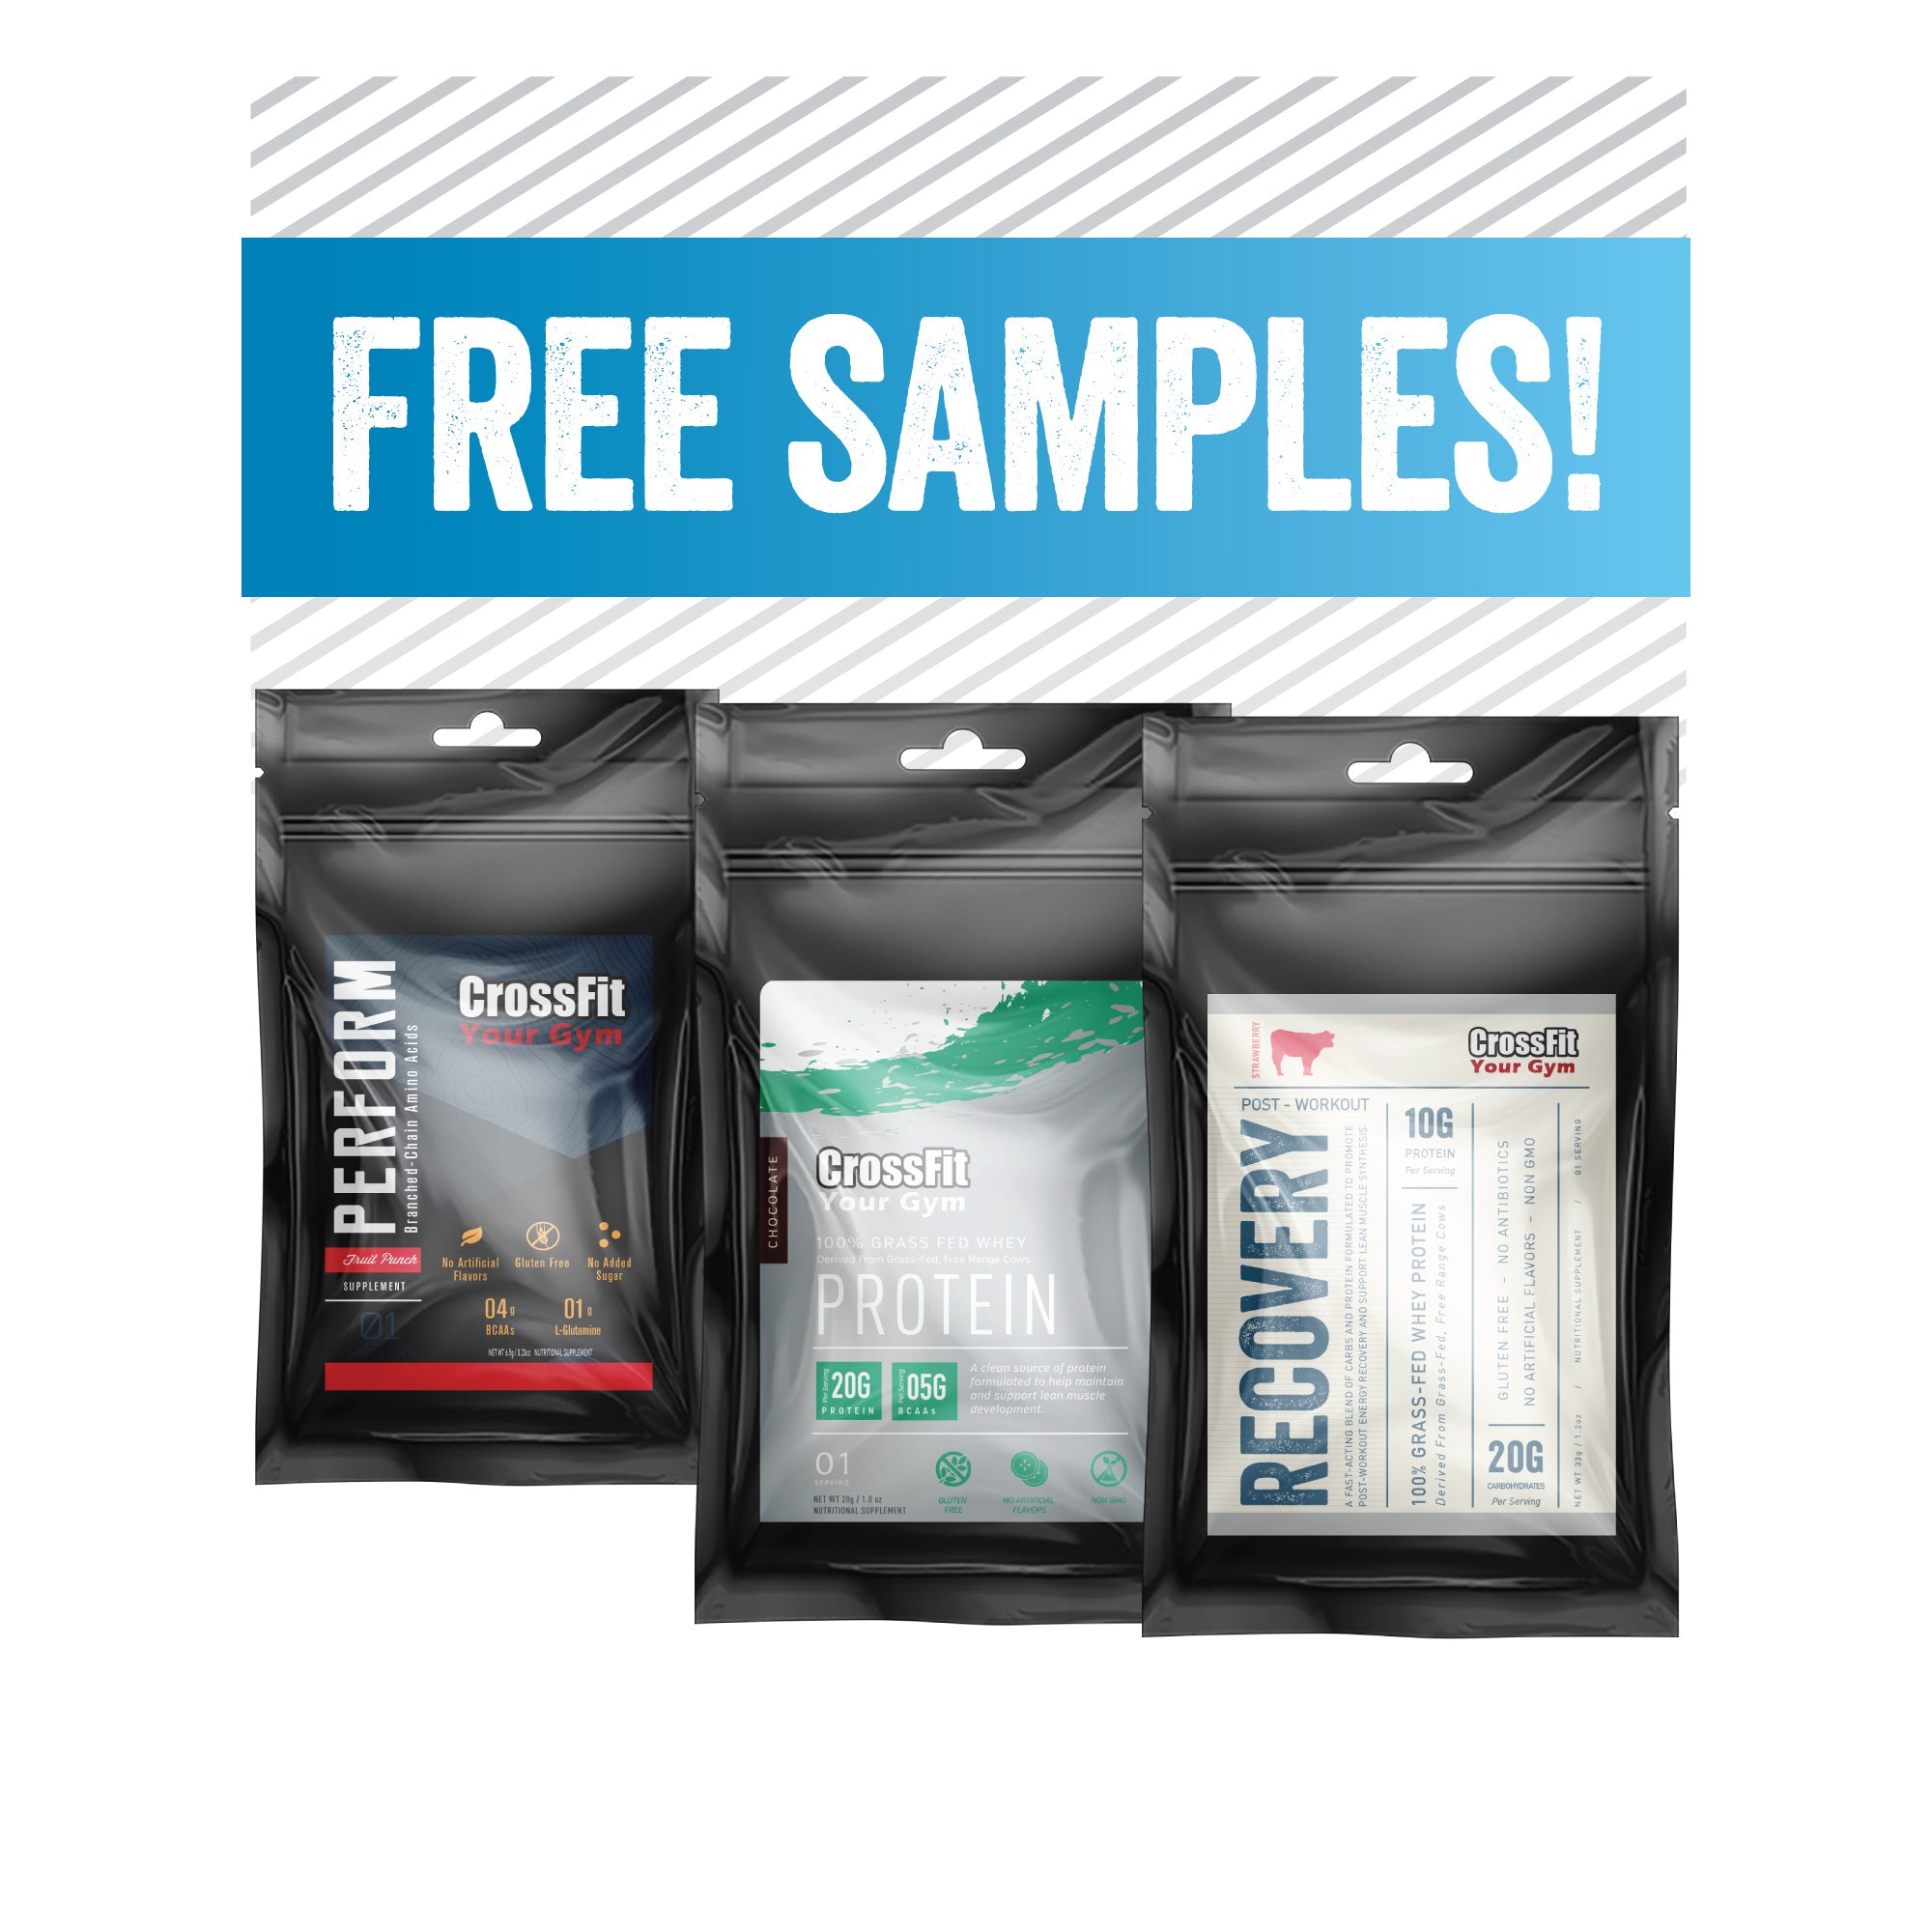 Free protein samples